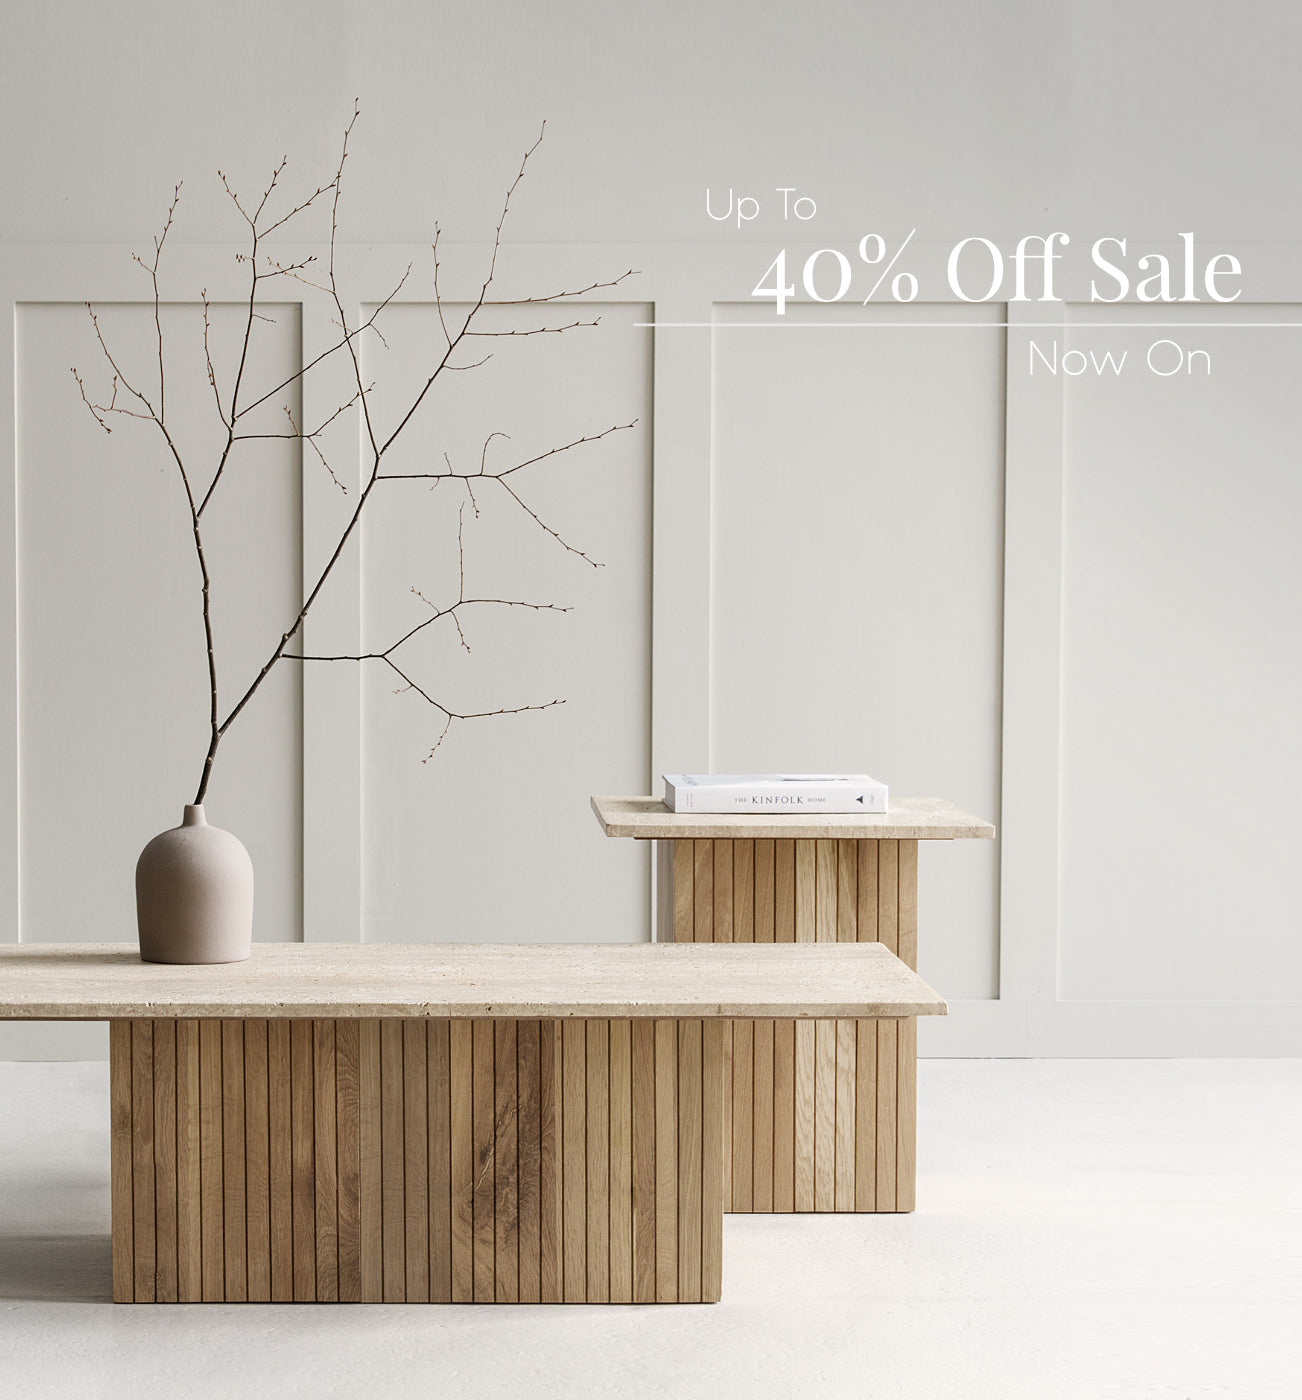 Up to 40% off sale